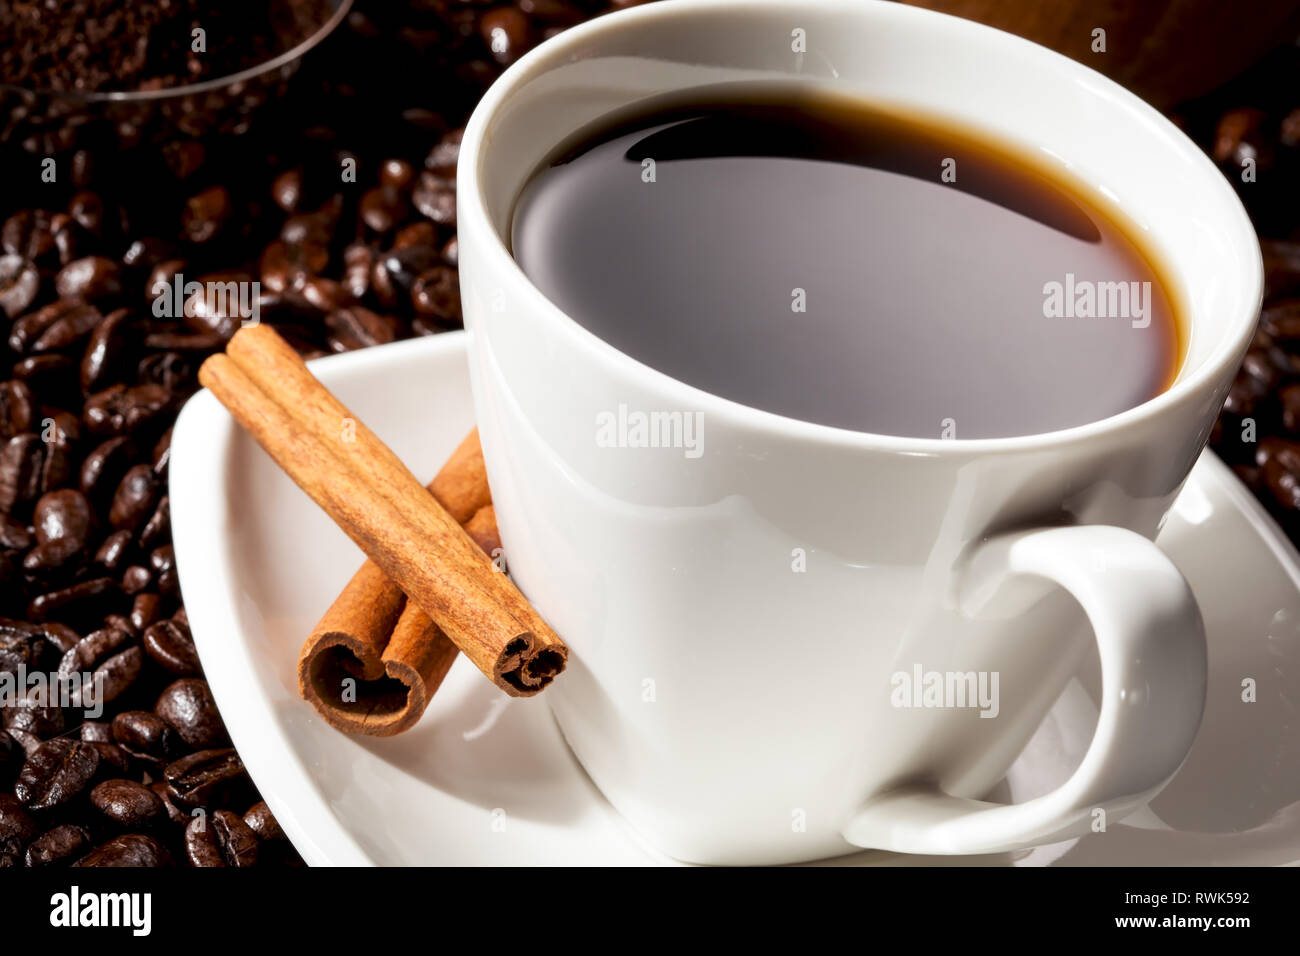 Close-up of Black Coffee in a white Coffee cup with cinnamon and whole beans. Stock Photo